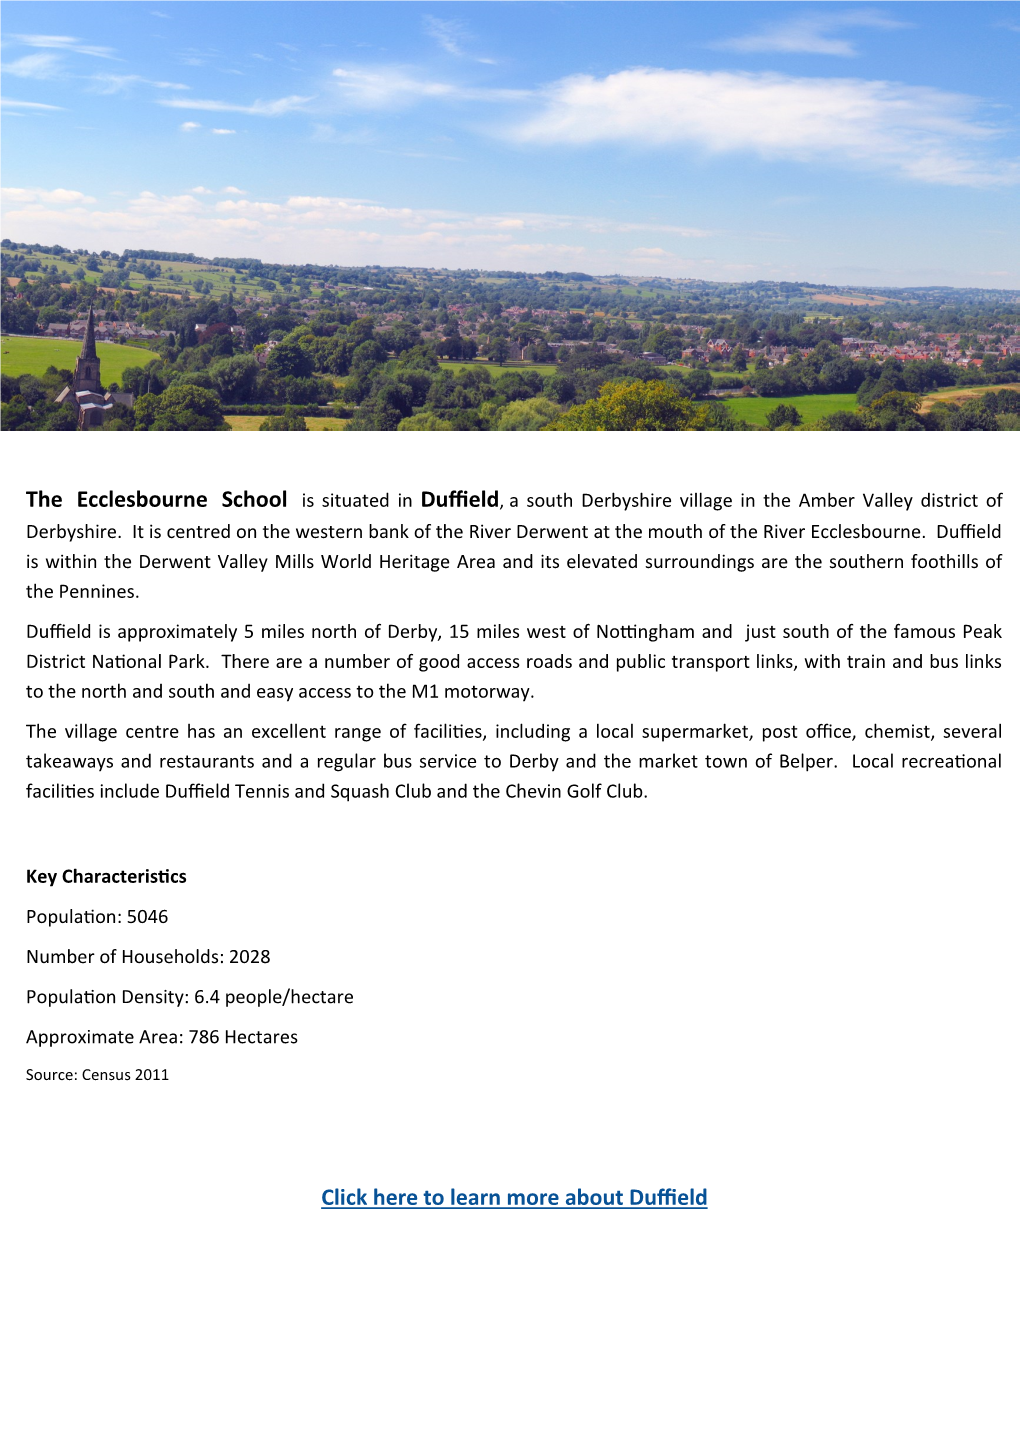 The Ecclesbourne School Click Here to Learn More About Duffield